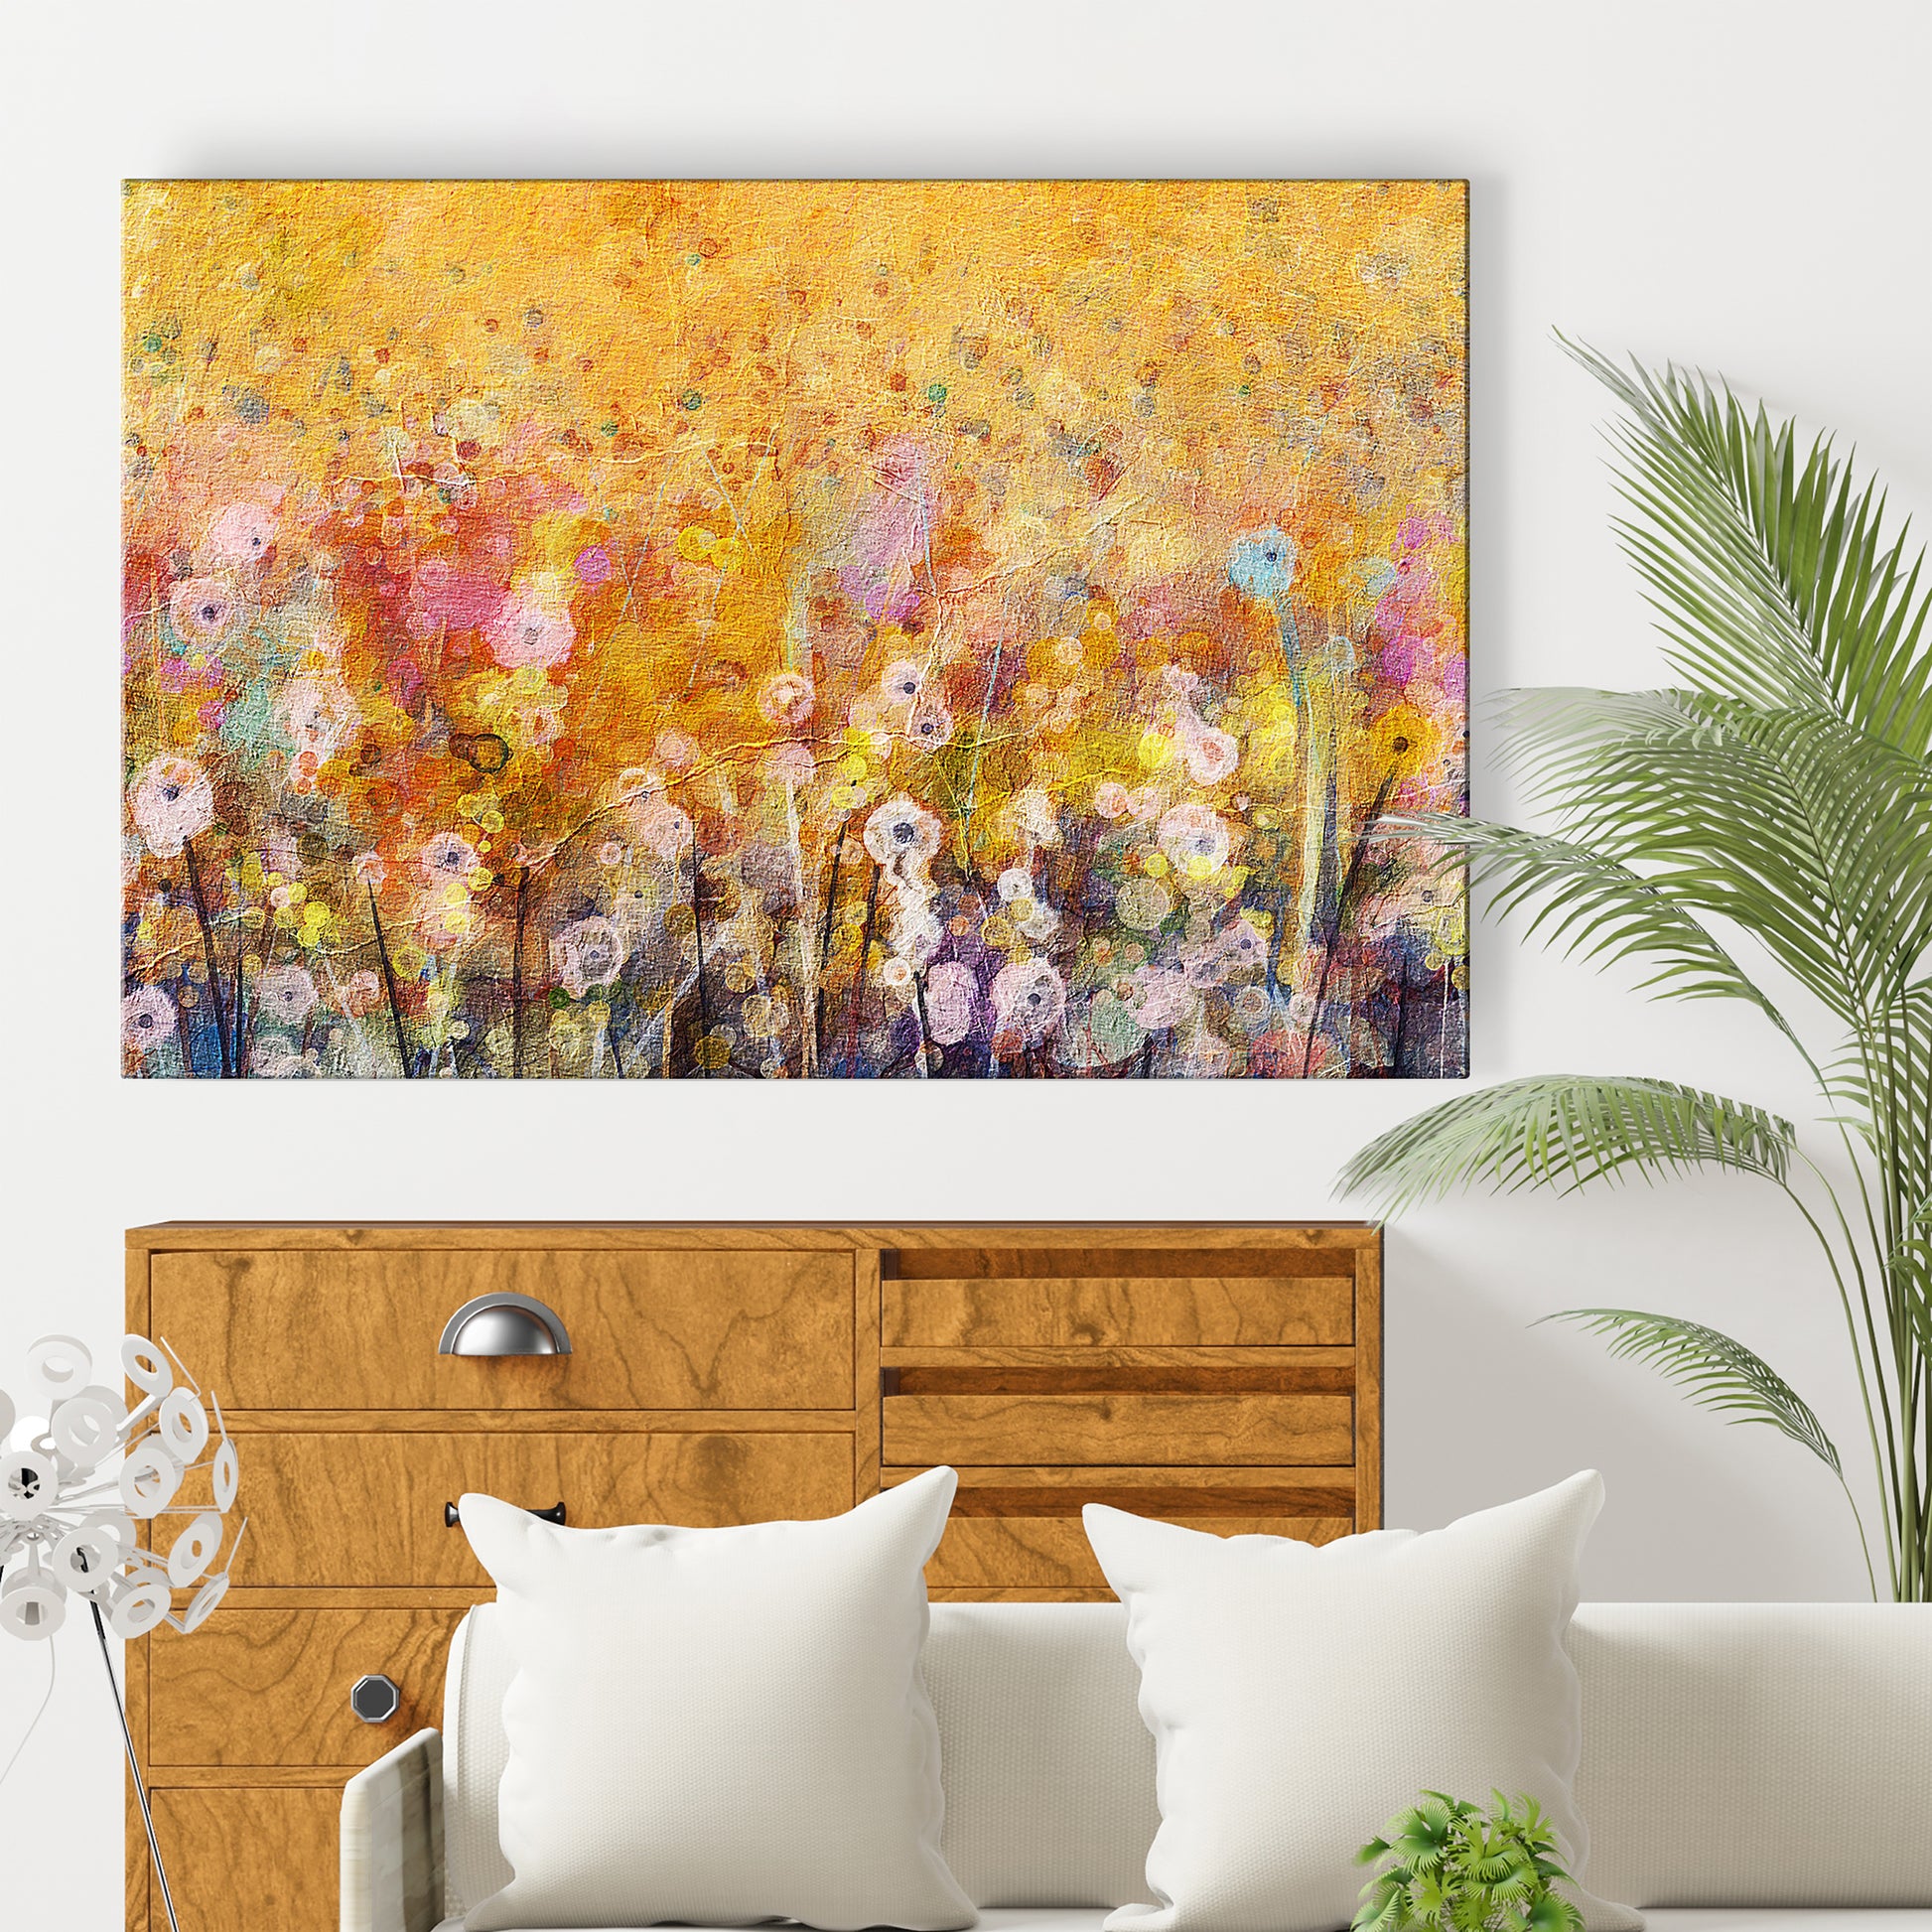 Mount Desert Isle Canvas Wall Art - Image by Tailored Canvases